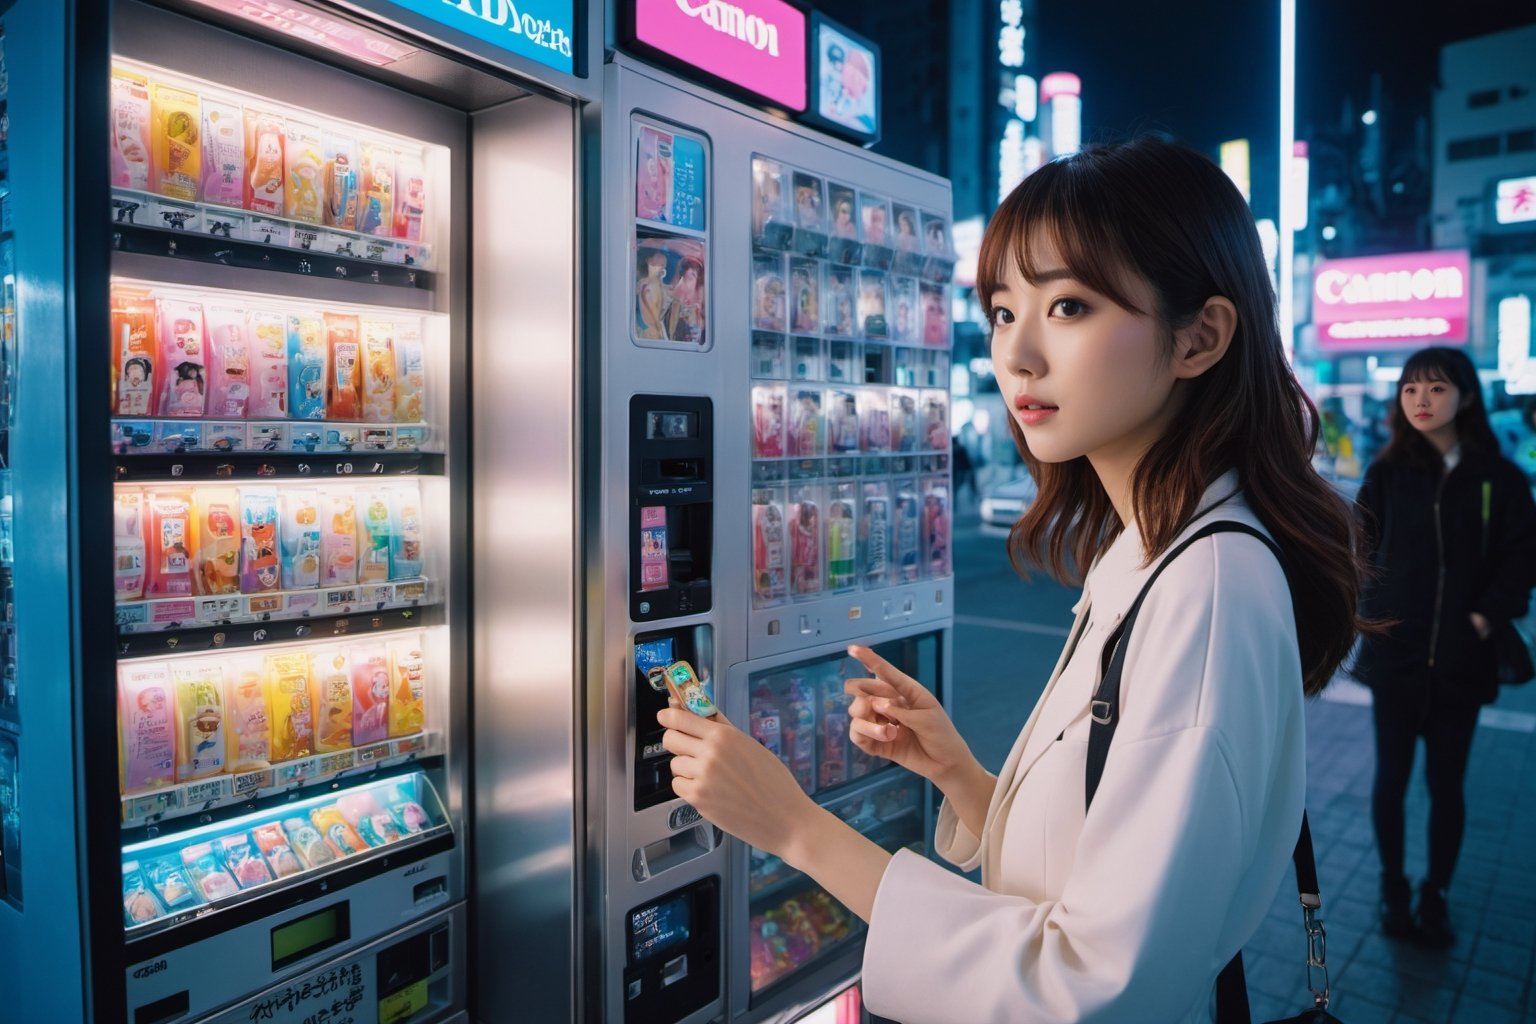 Photo of a young Japanese woman being sold from a futuristic, high-tech vending machine. The vending machine is filled with various female figures, each representing a different type of companion. Canon 5d Mark 4, Kodak Ektar, neon light